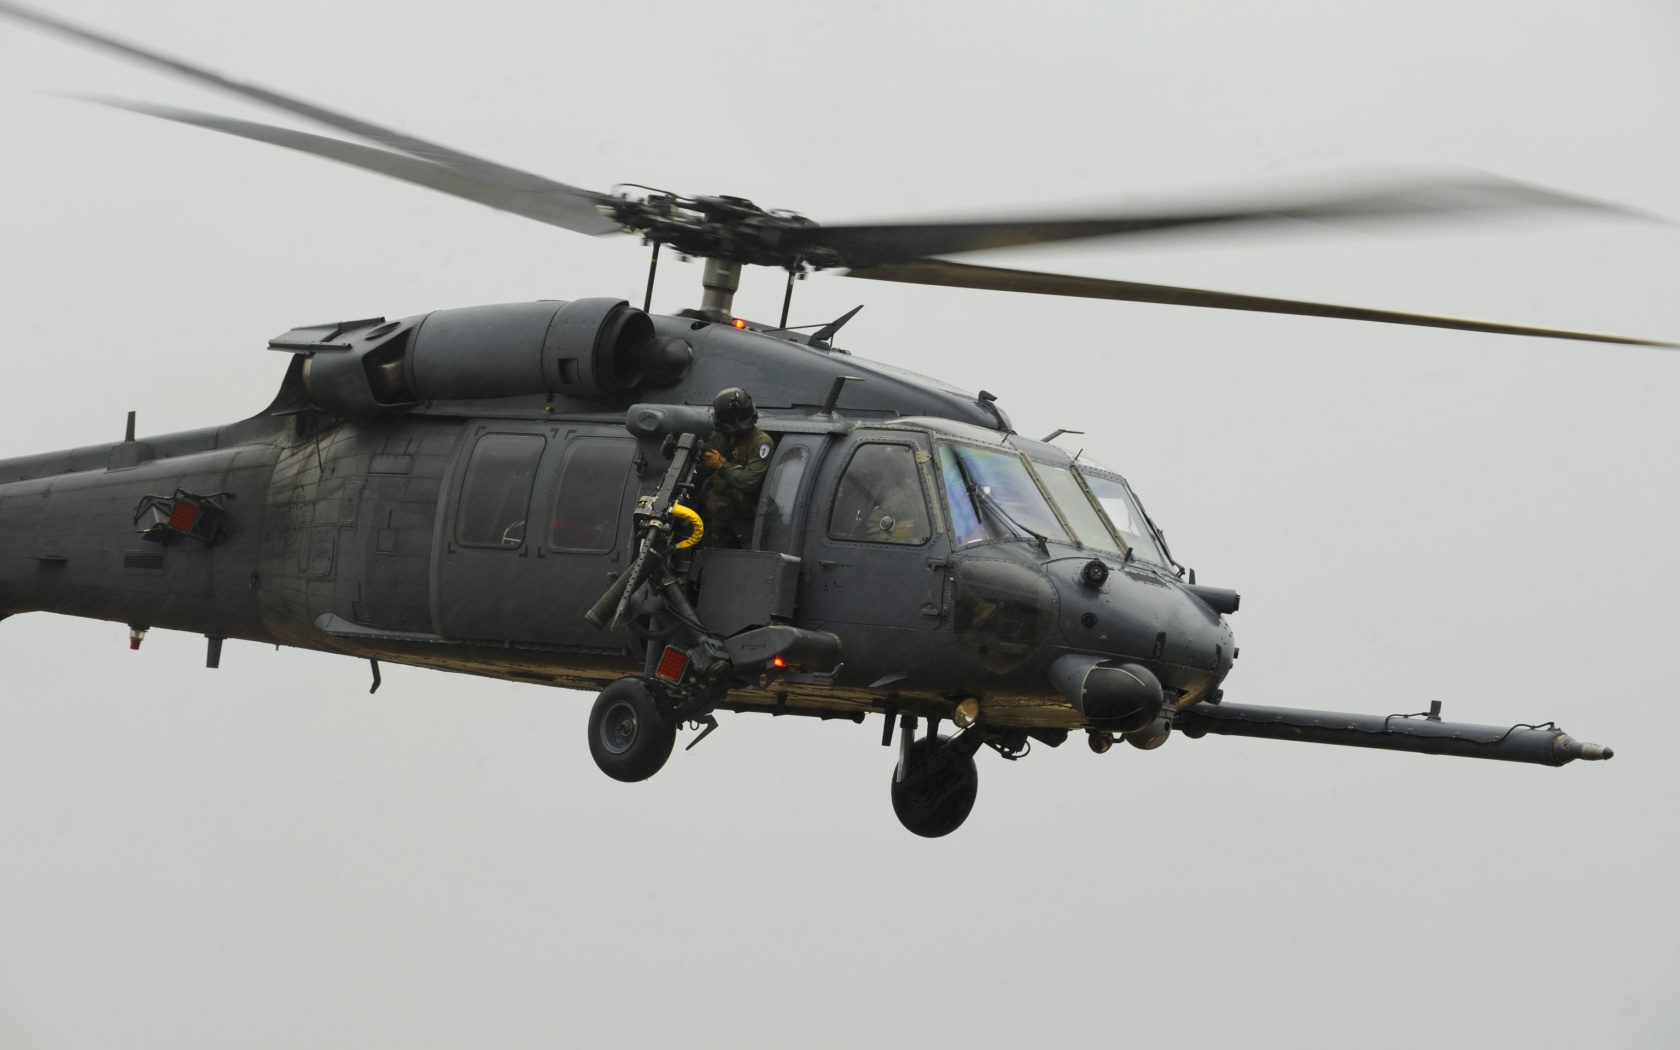 Das Helicopter Sikorsky HH 60 Pave Hawk Wallpaper 1680x1050